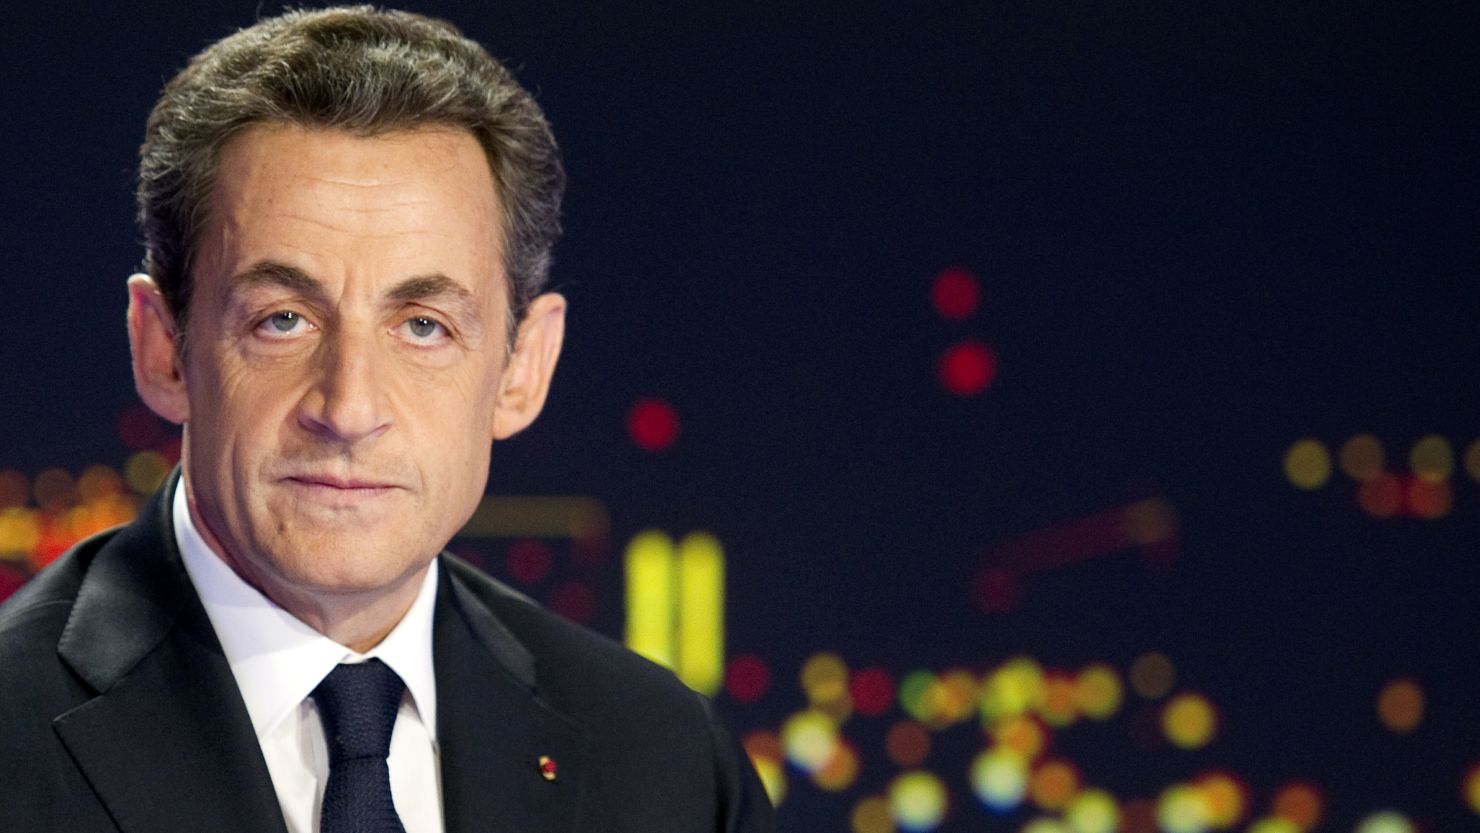 French President Nicolas Sarkozy announces his re-election bid Wednesday on French TV channel TF1.